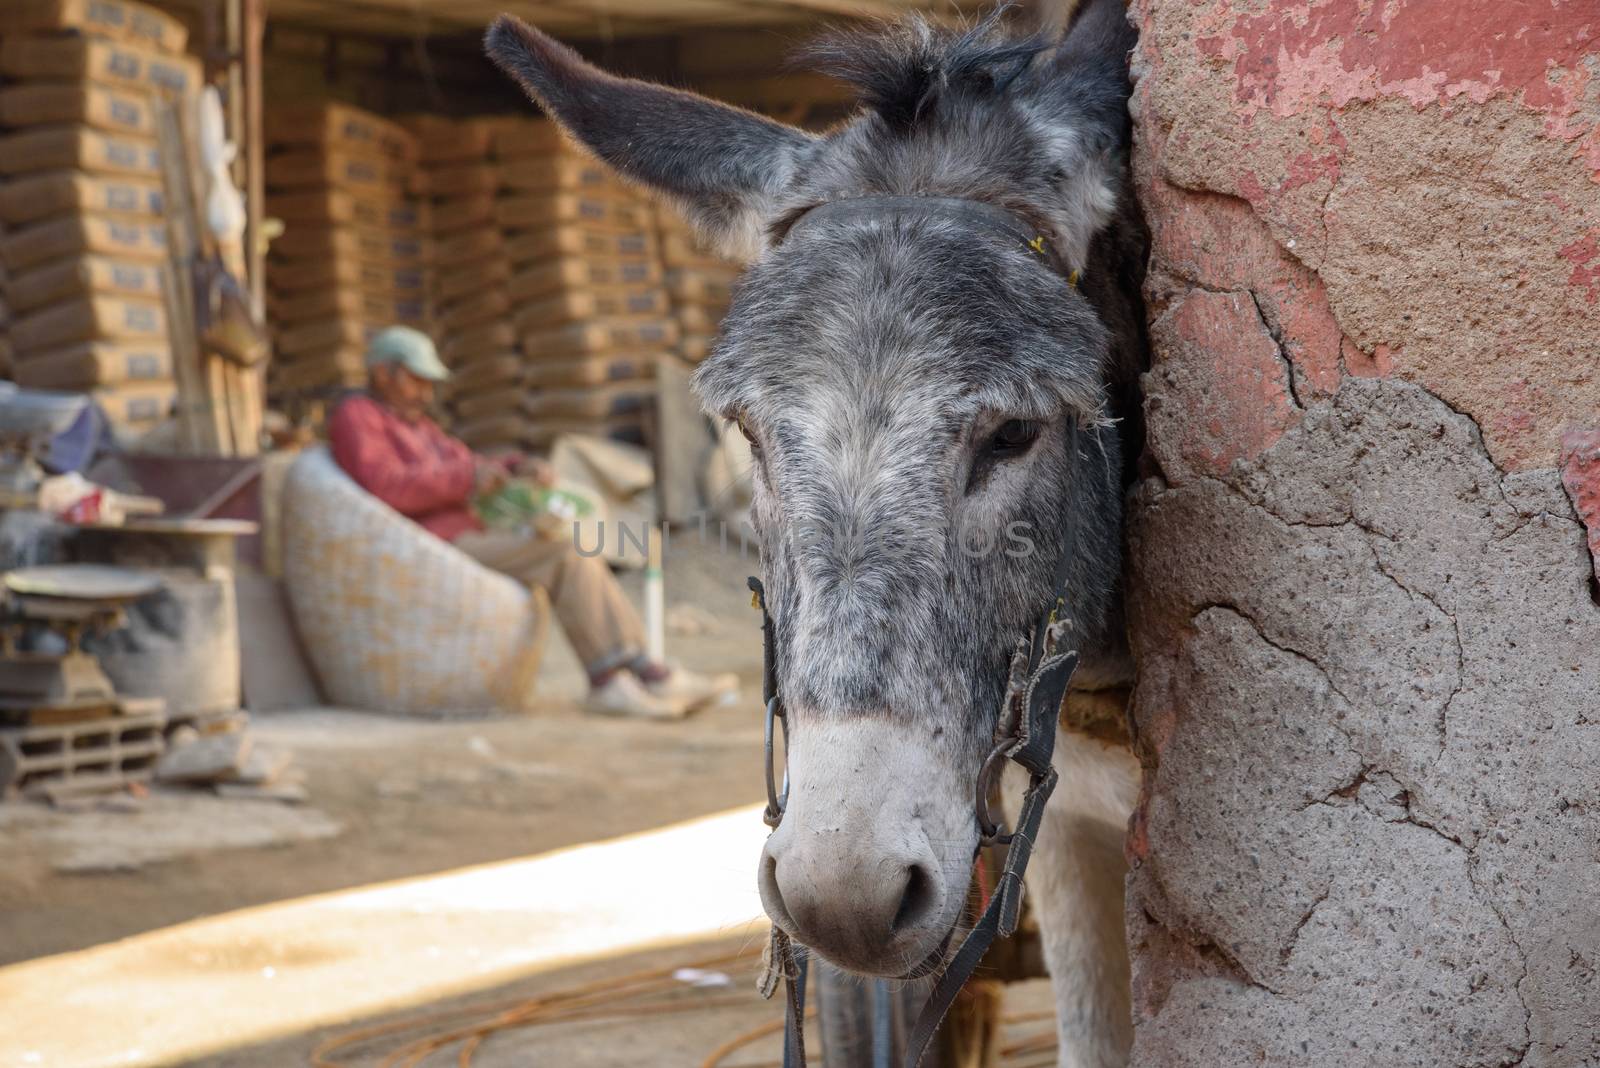 Donkey in Marrakesh, Morocco by johnnychaos